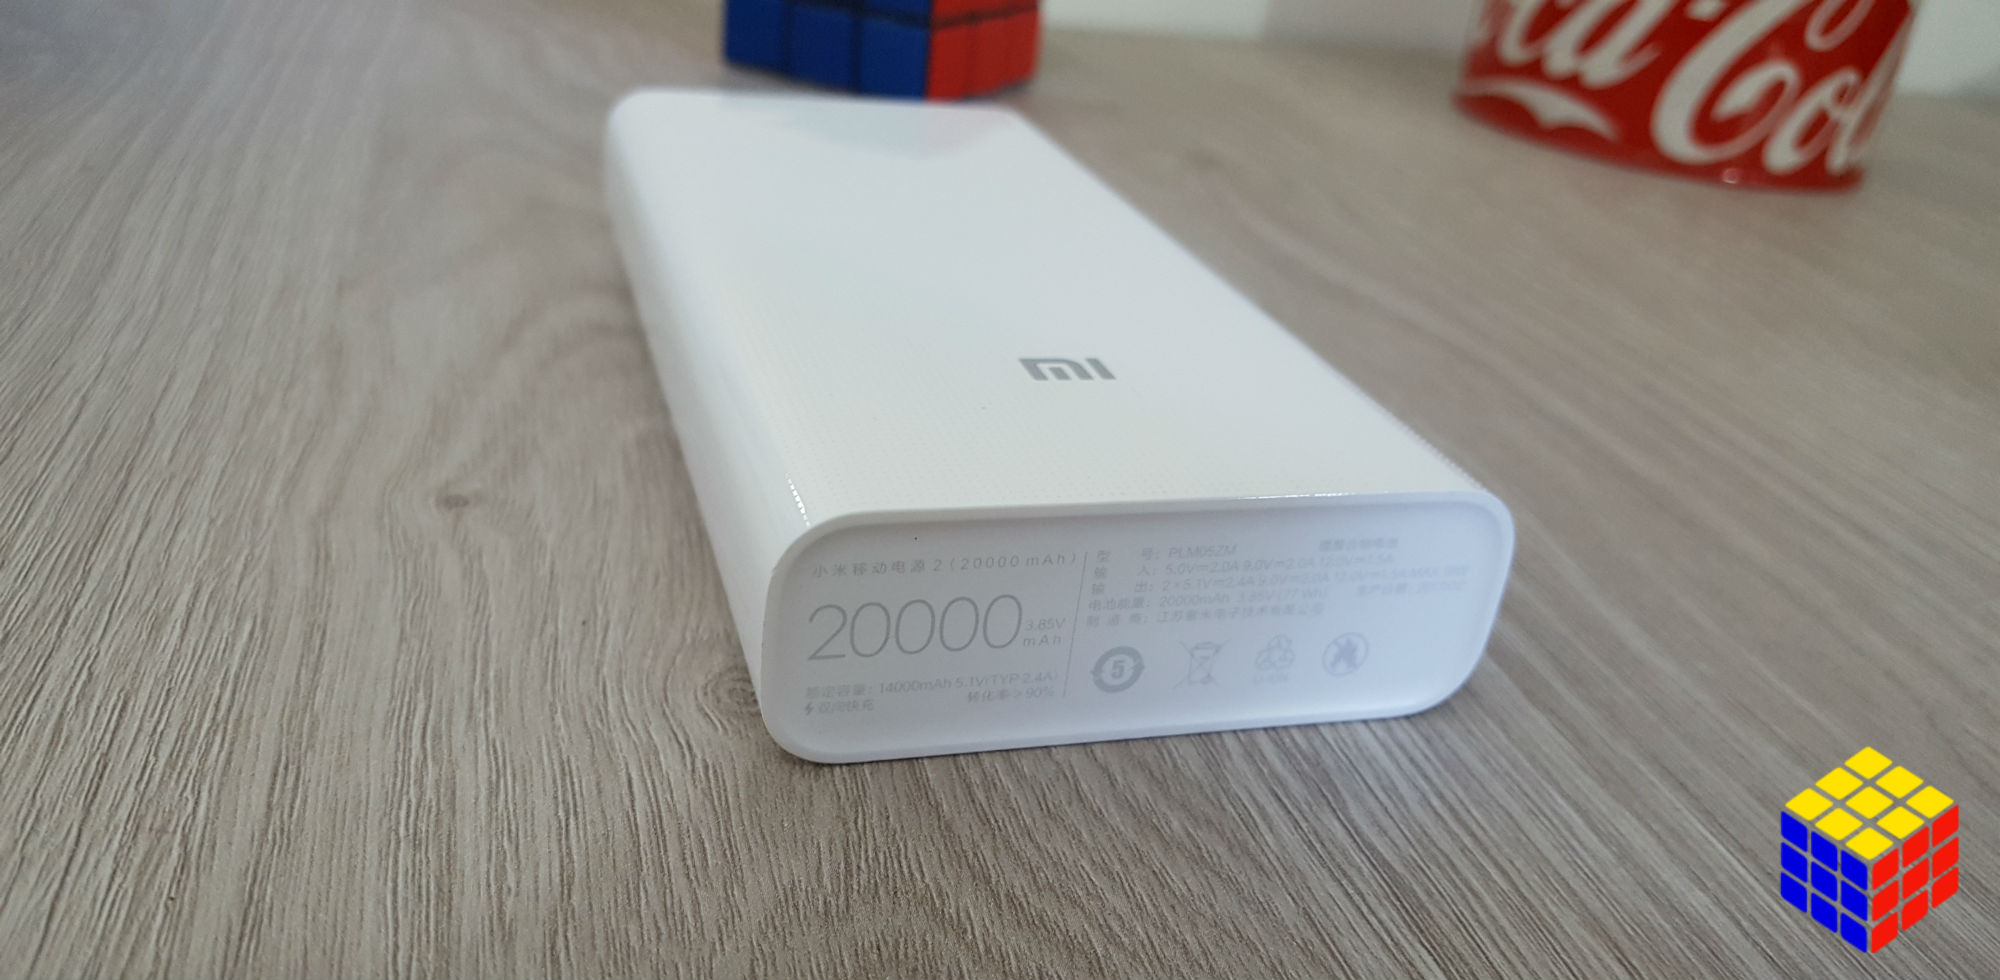 With the Xiaomi Mi Power Bank 2 of 20,000mAh you can forget about the charger for a week